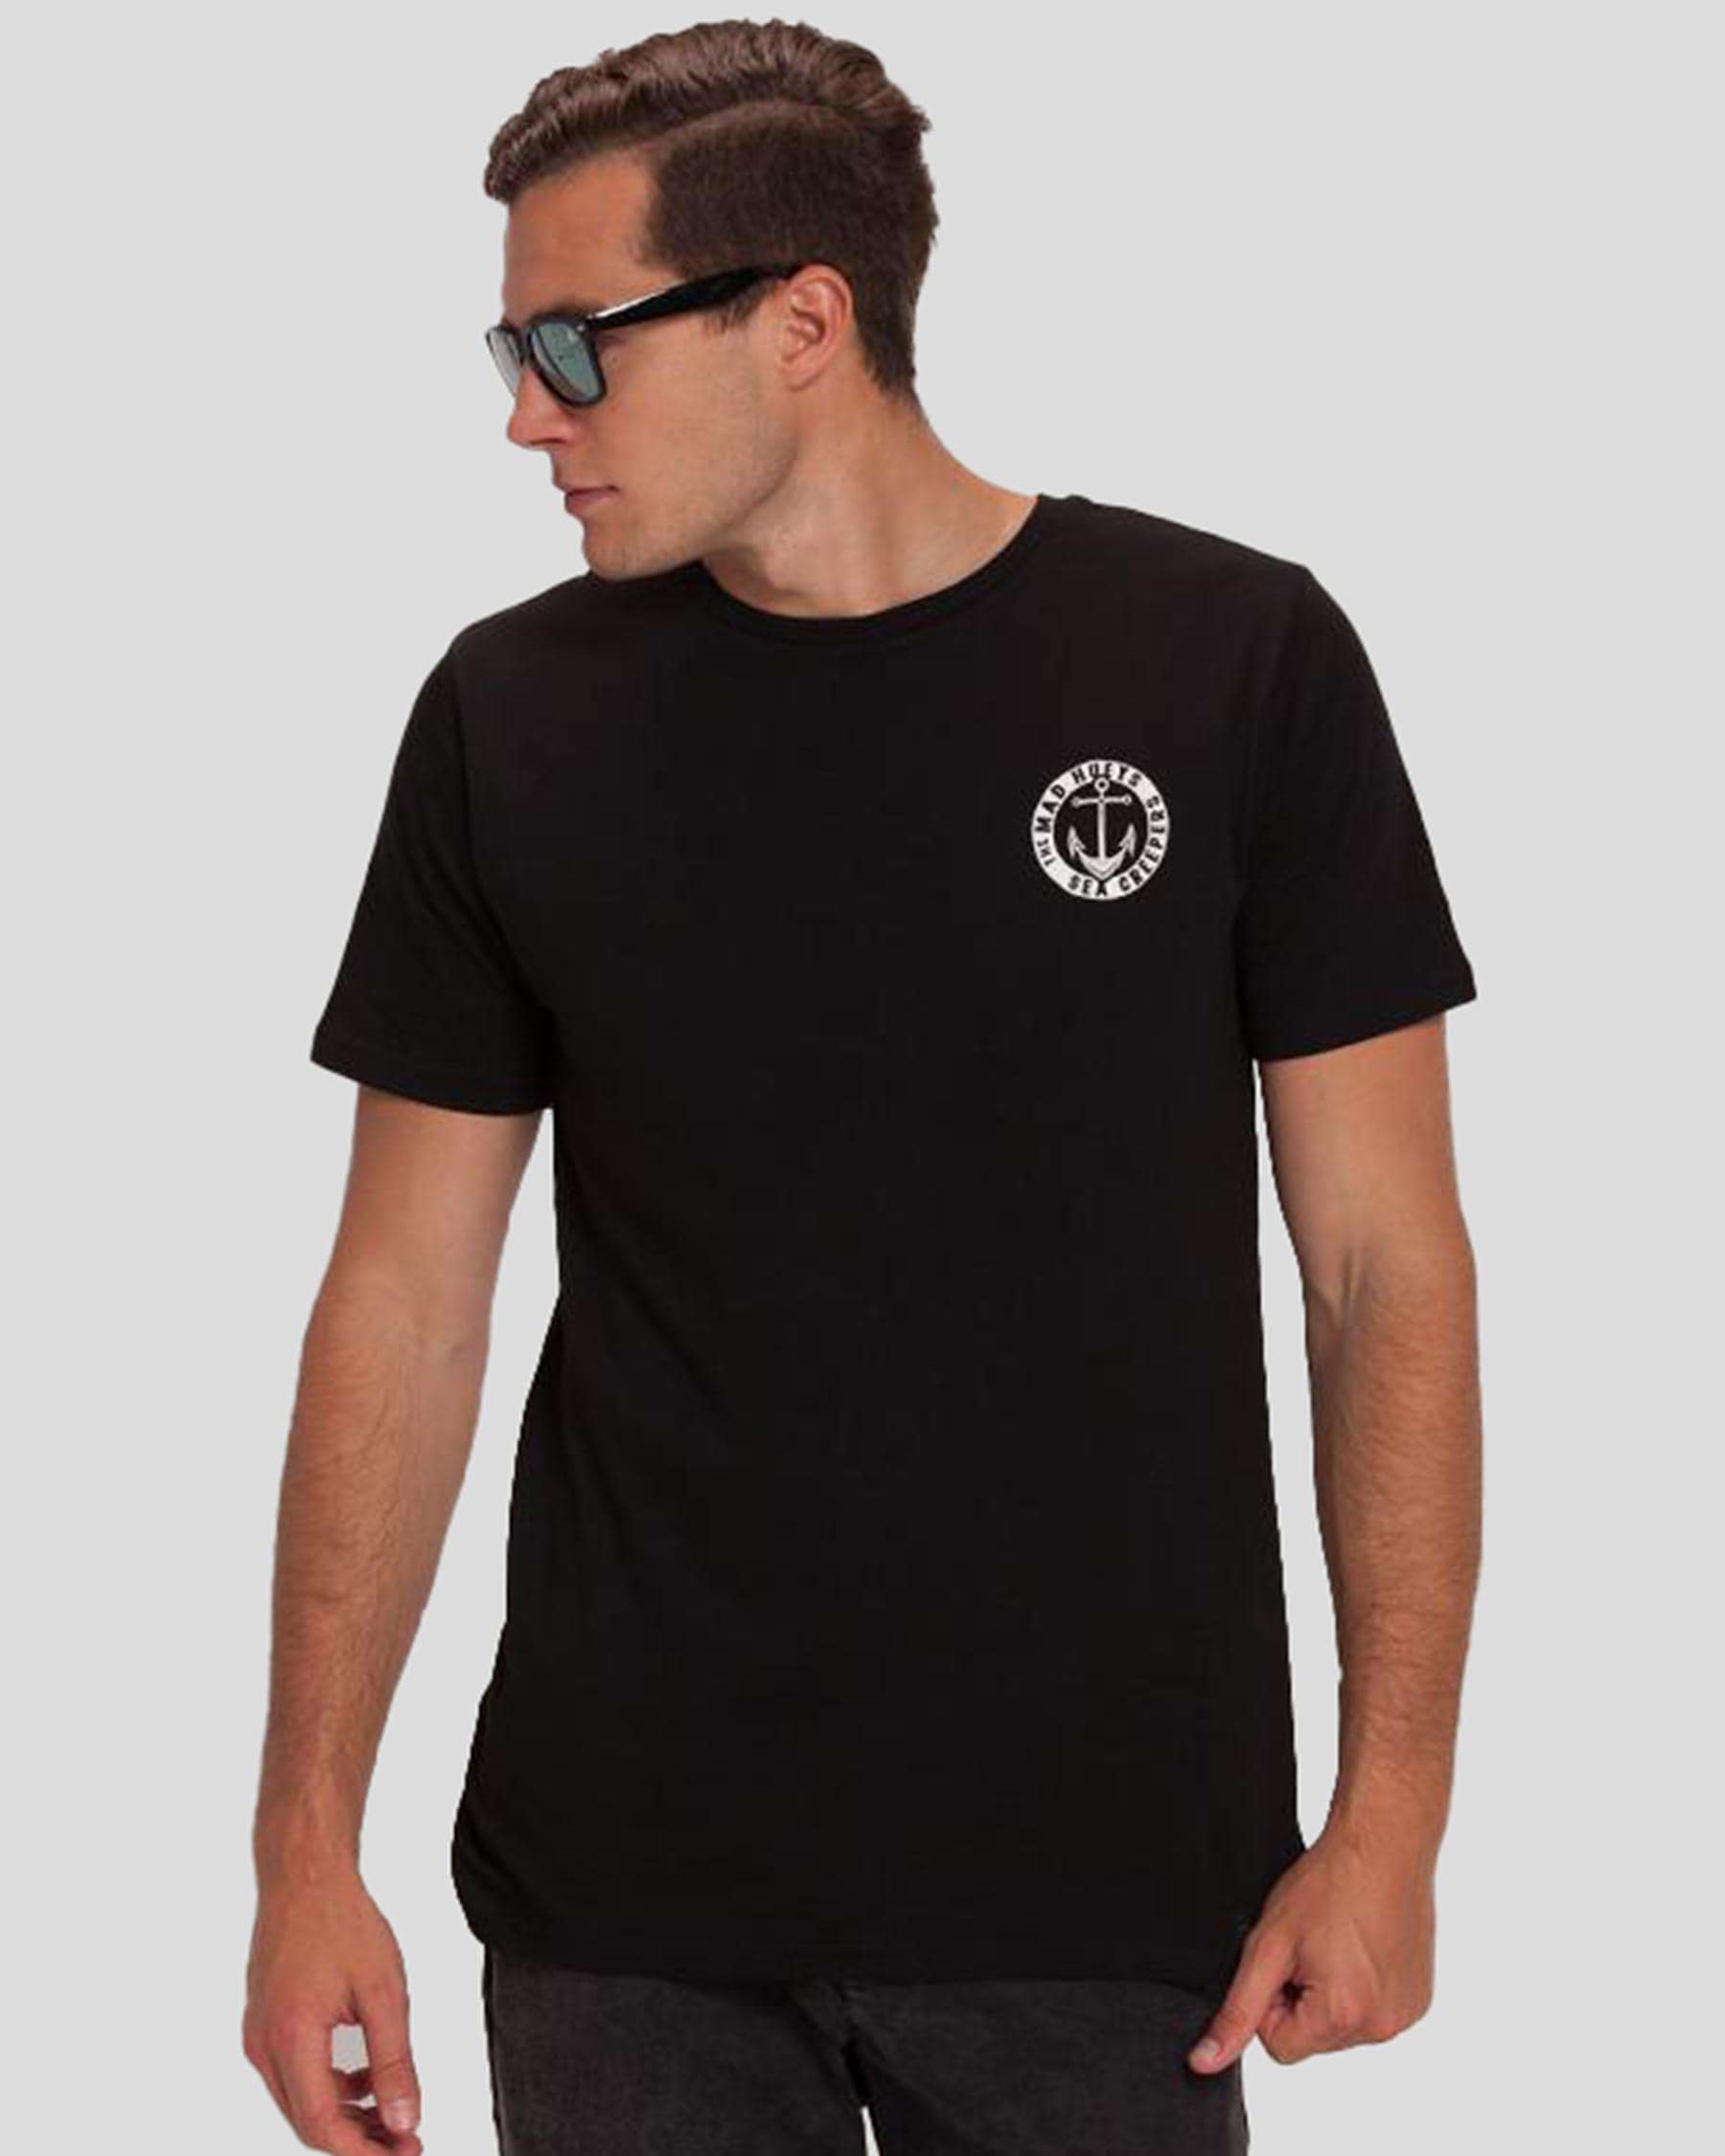 Shop The Mad Hueys Sea Creepers T-Shirt In Black - Fast Shipping & Easy ...